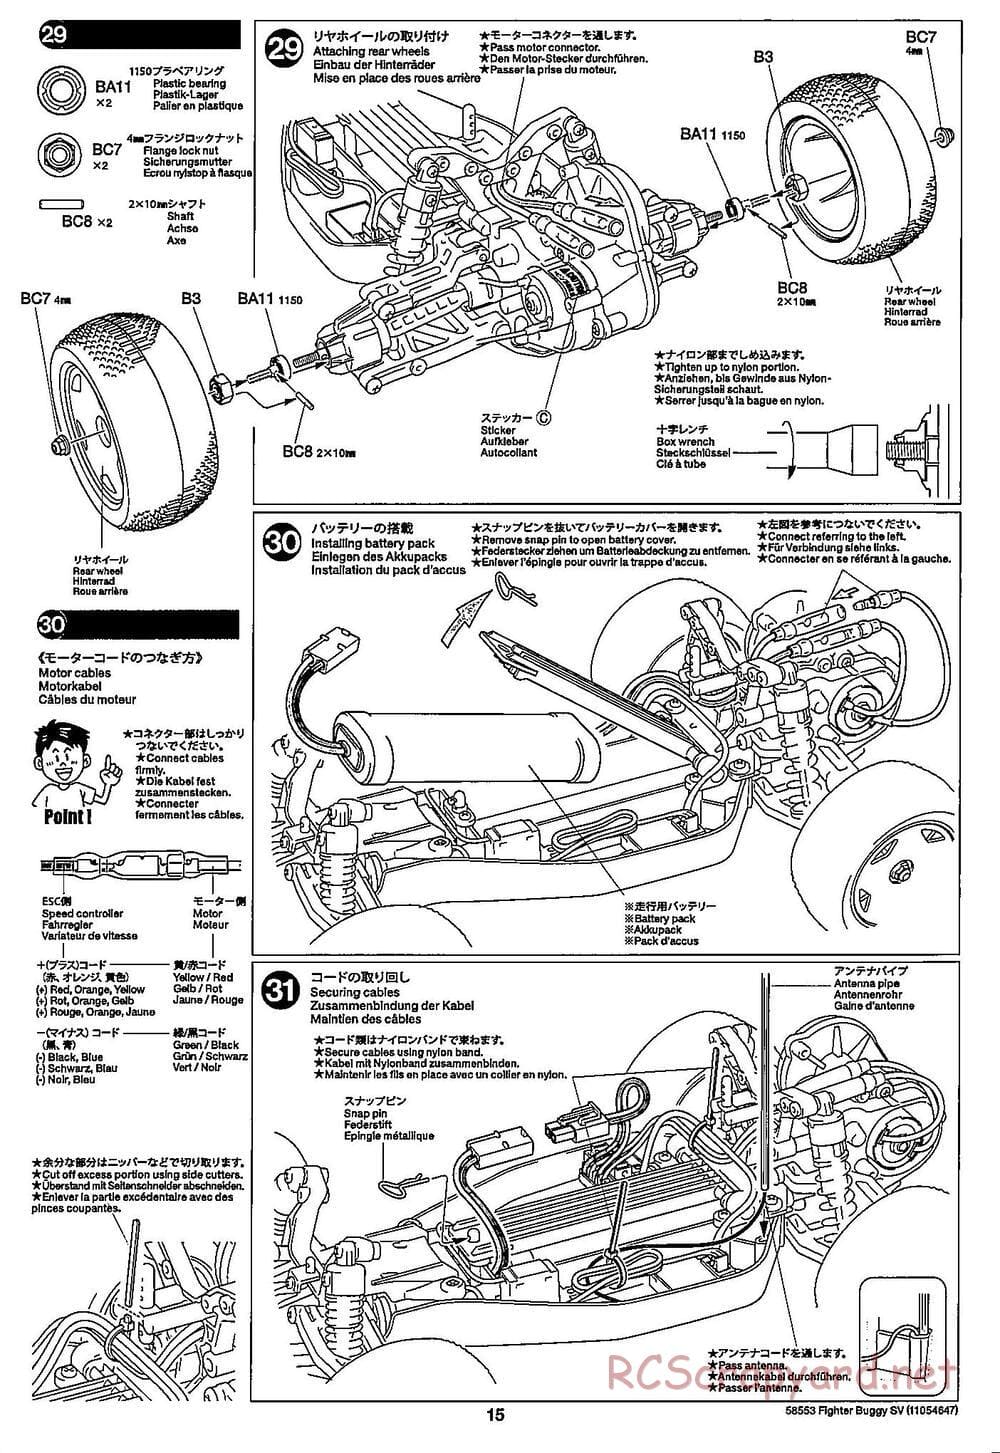 Tamiya - Fighter Buggy SV Chassis - Manual - Page 15